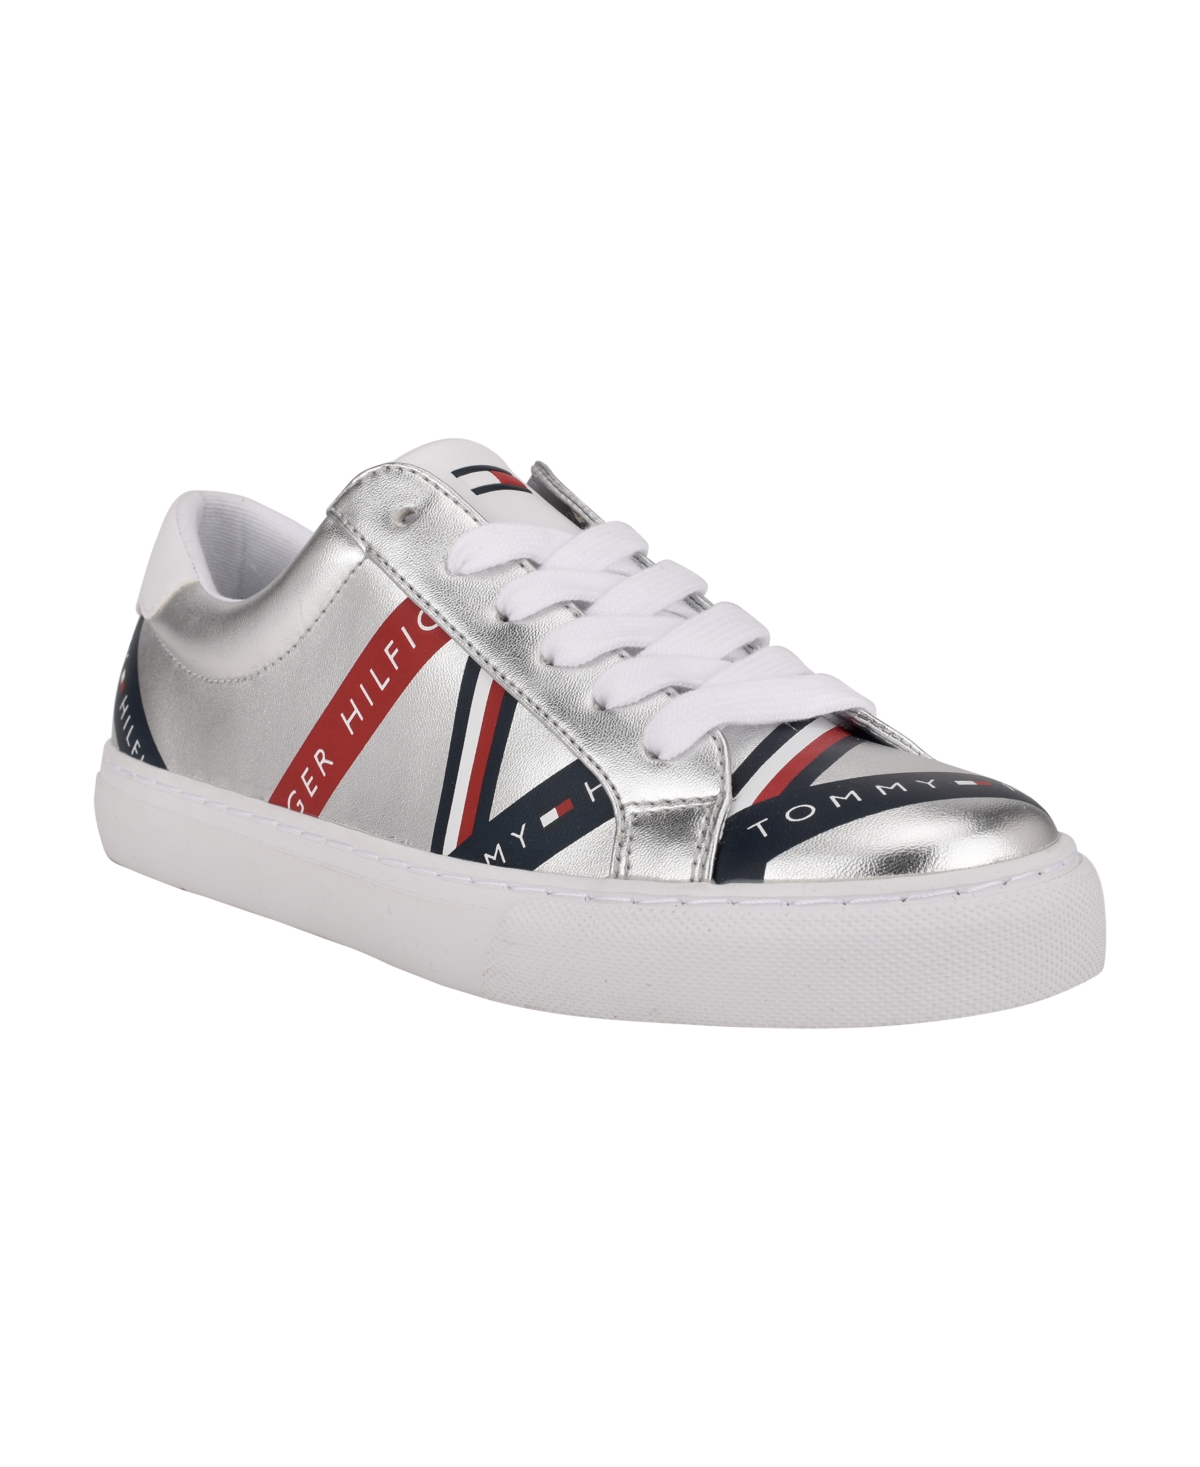 TOMMY HILFIGER LACEN LACE UP SNEAKERS WOMEN'S SHOES